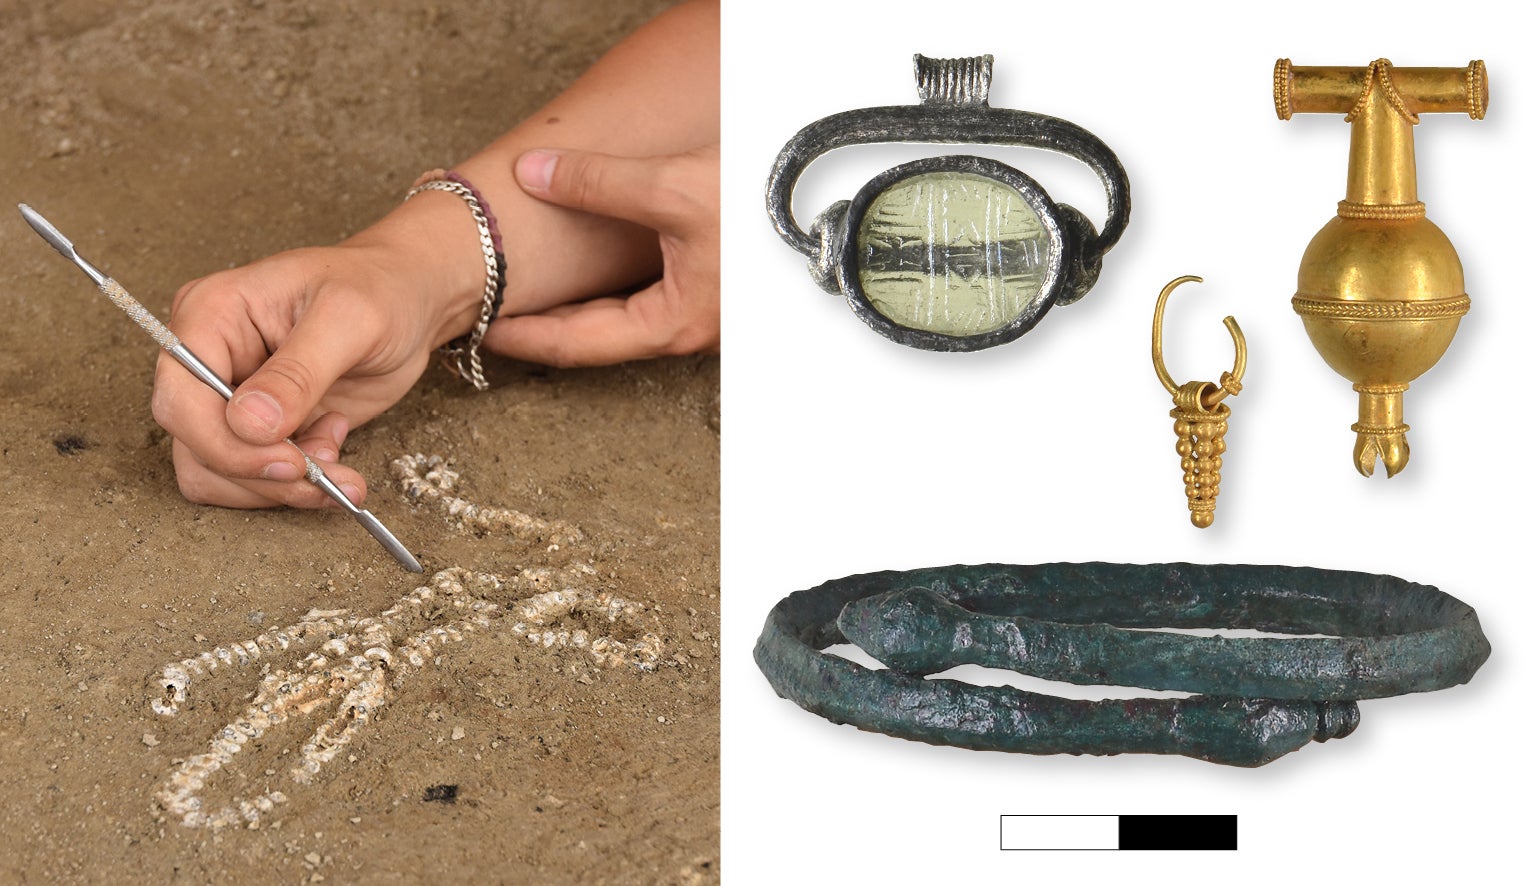 Gold, silver and amber jewelry was discovered in the 2000-year-old temple